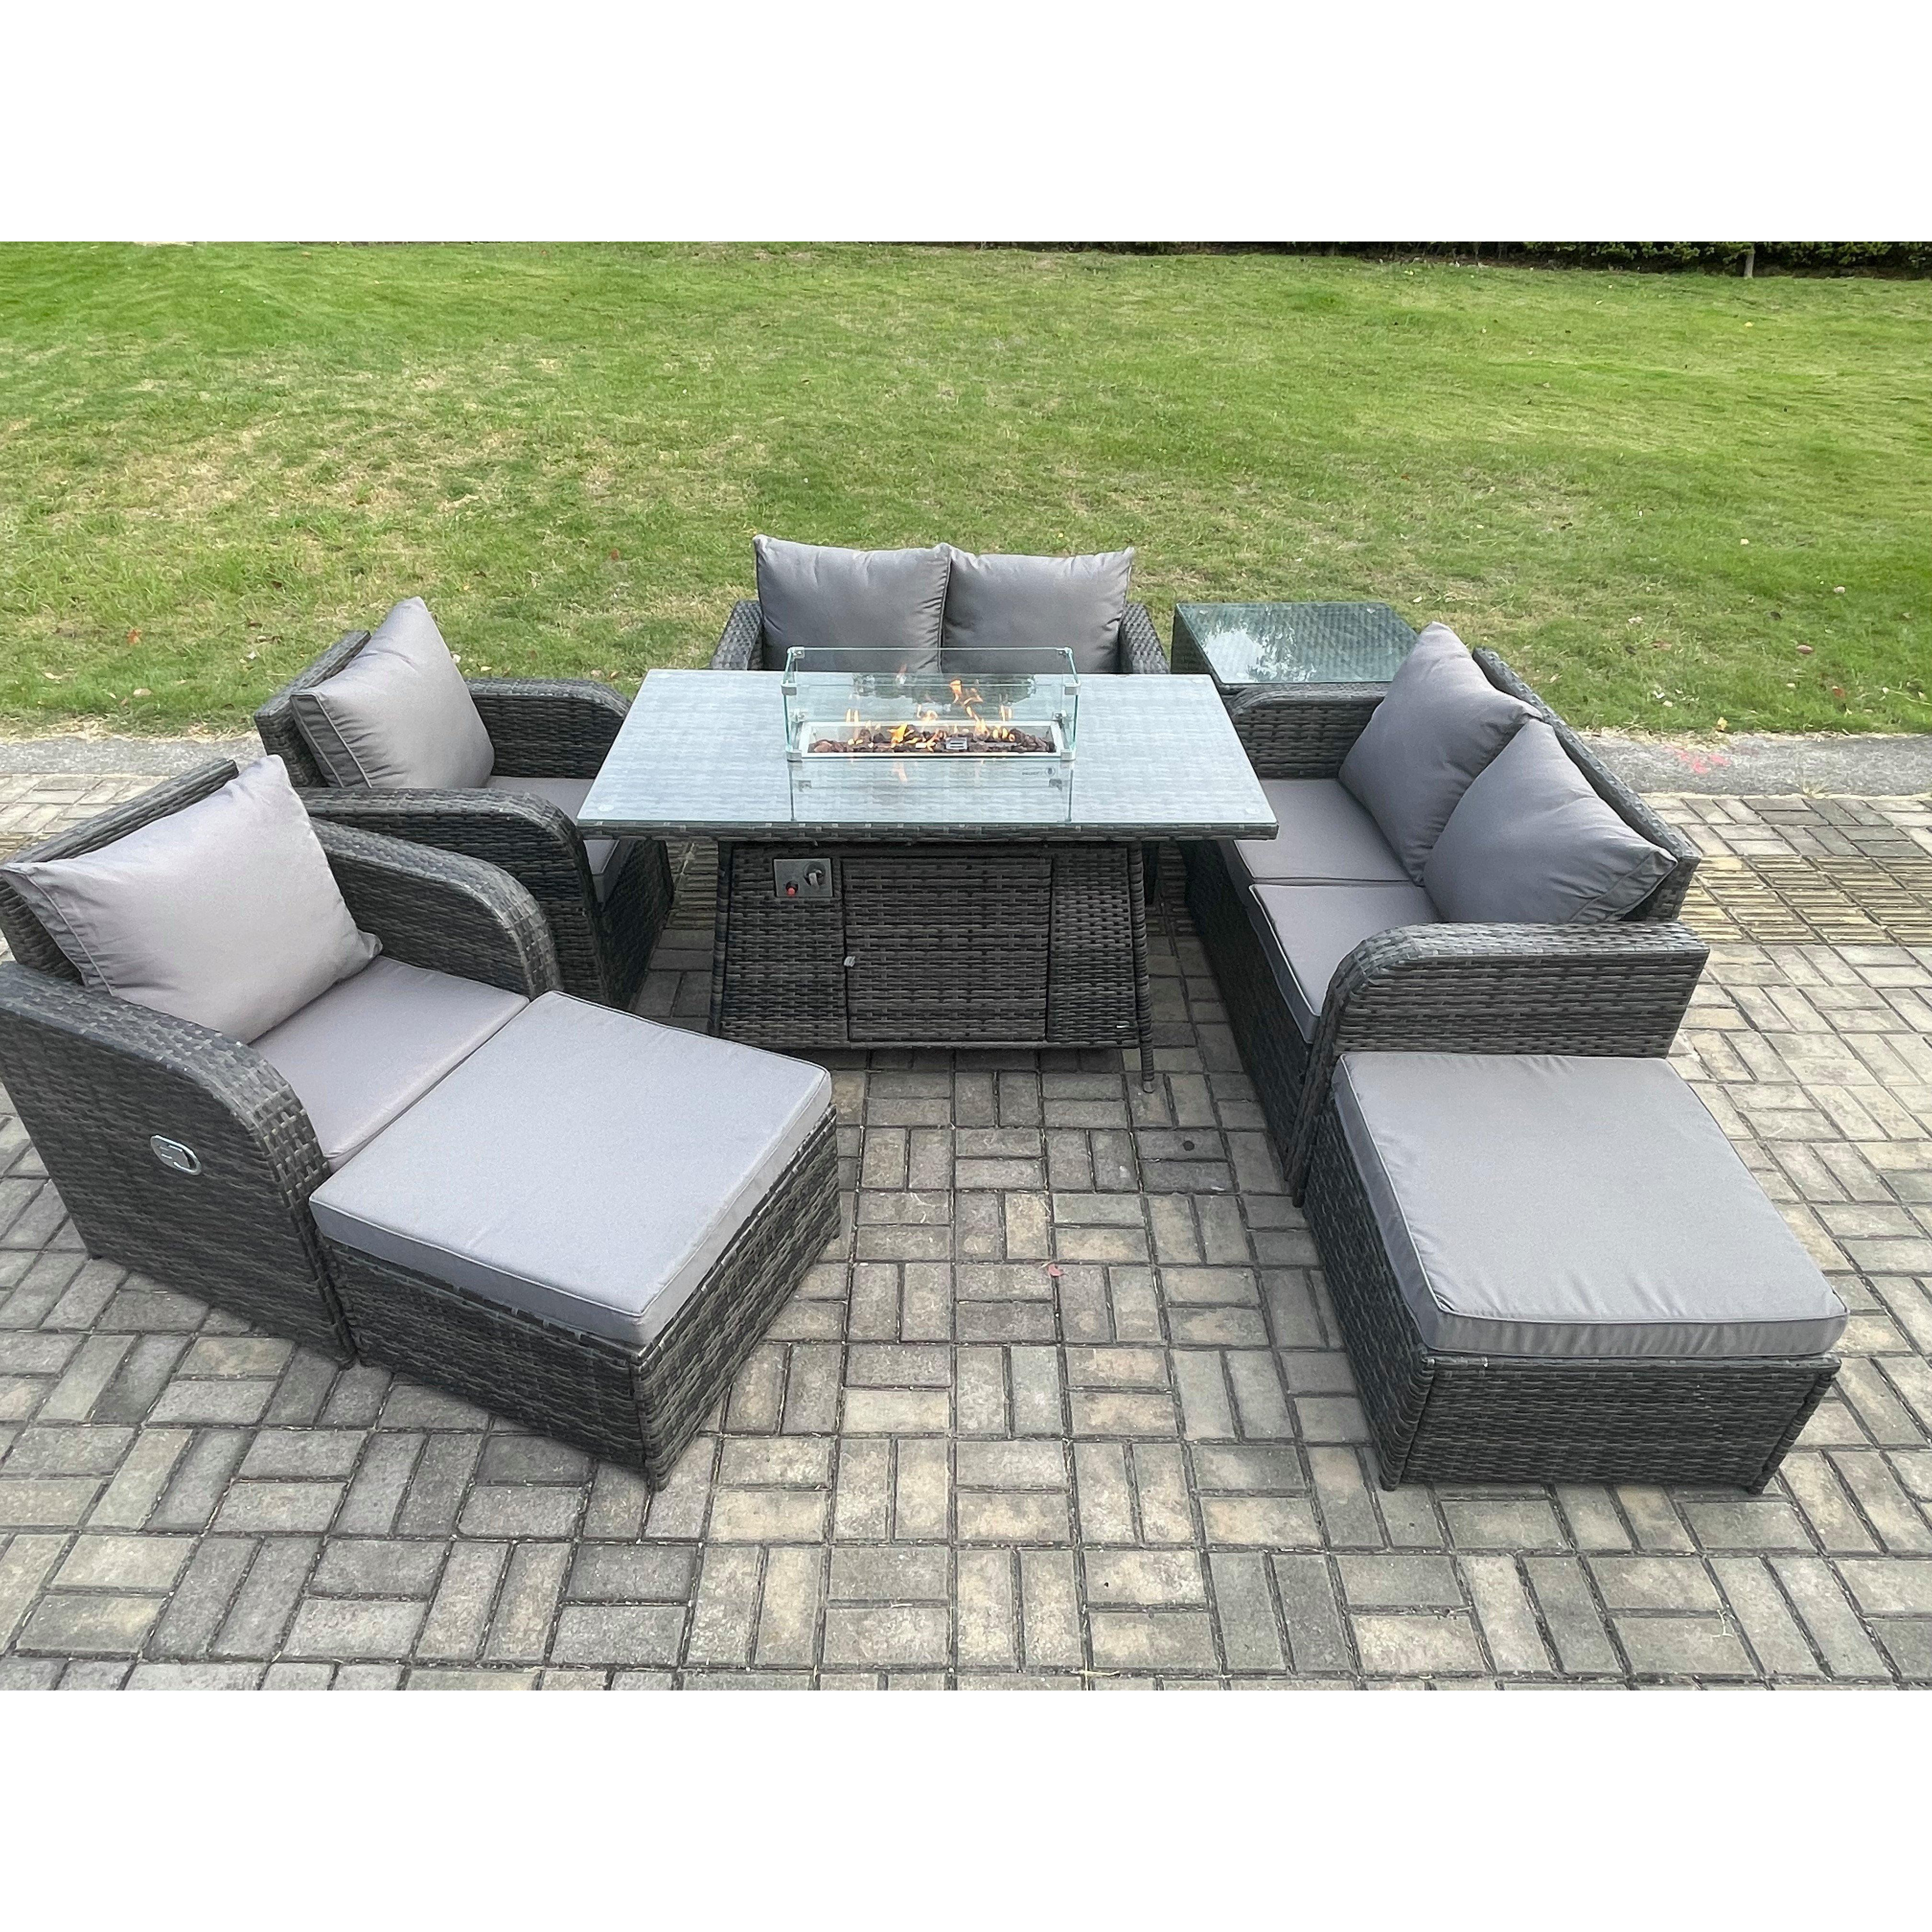 8 Seater Rattan Garden Furniture Set Outdoor Propane Gas Fire Pit Table and Sofa Chair set with Side Table 2 Big Footstool - image 1